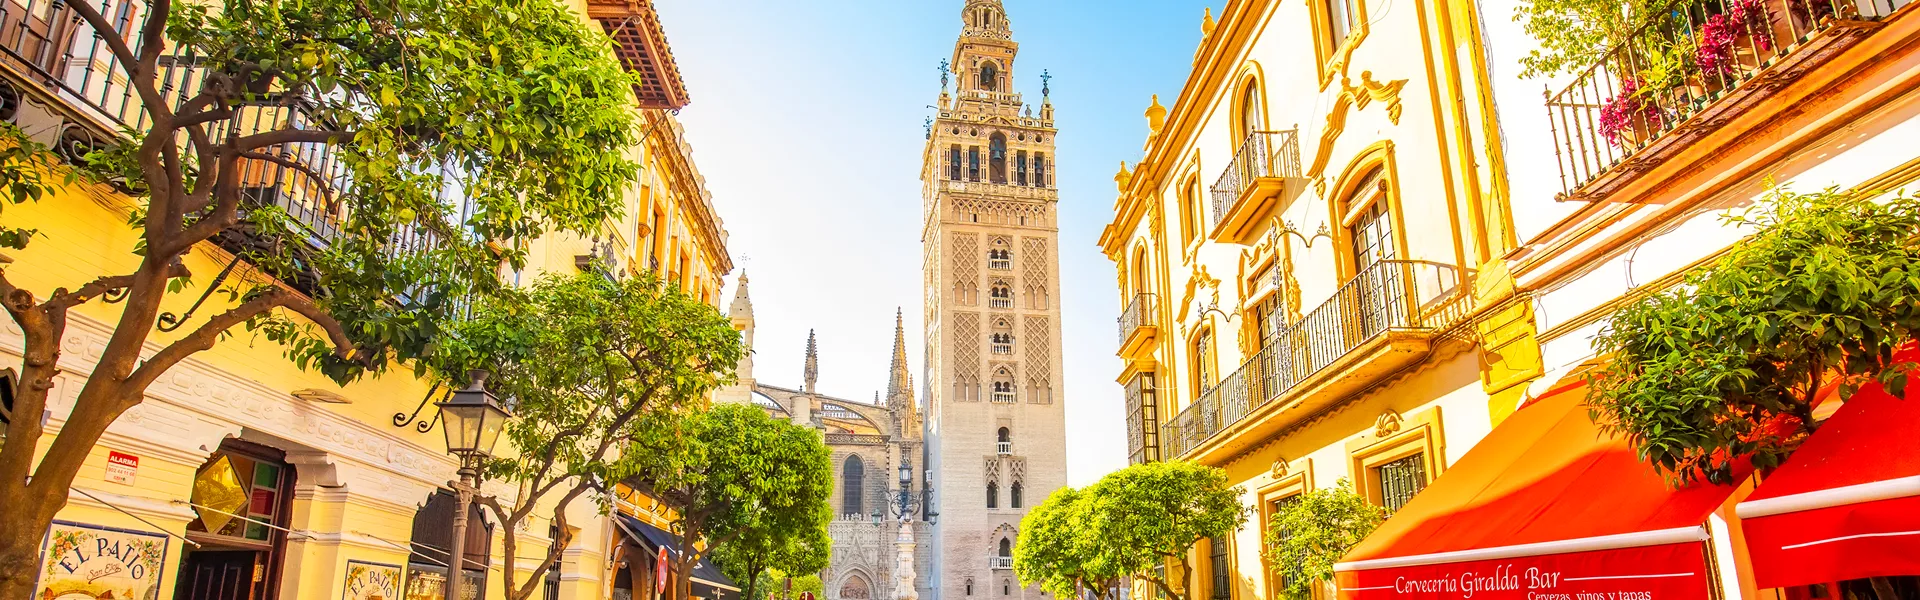 Seville Cathedral And Giralda Tower, Spain 1293630789